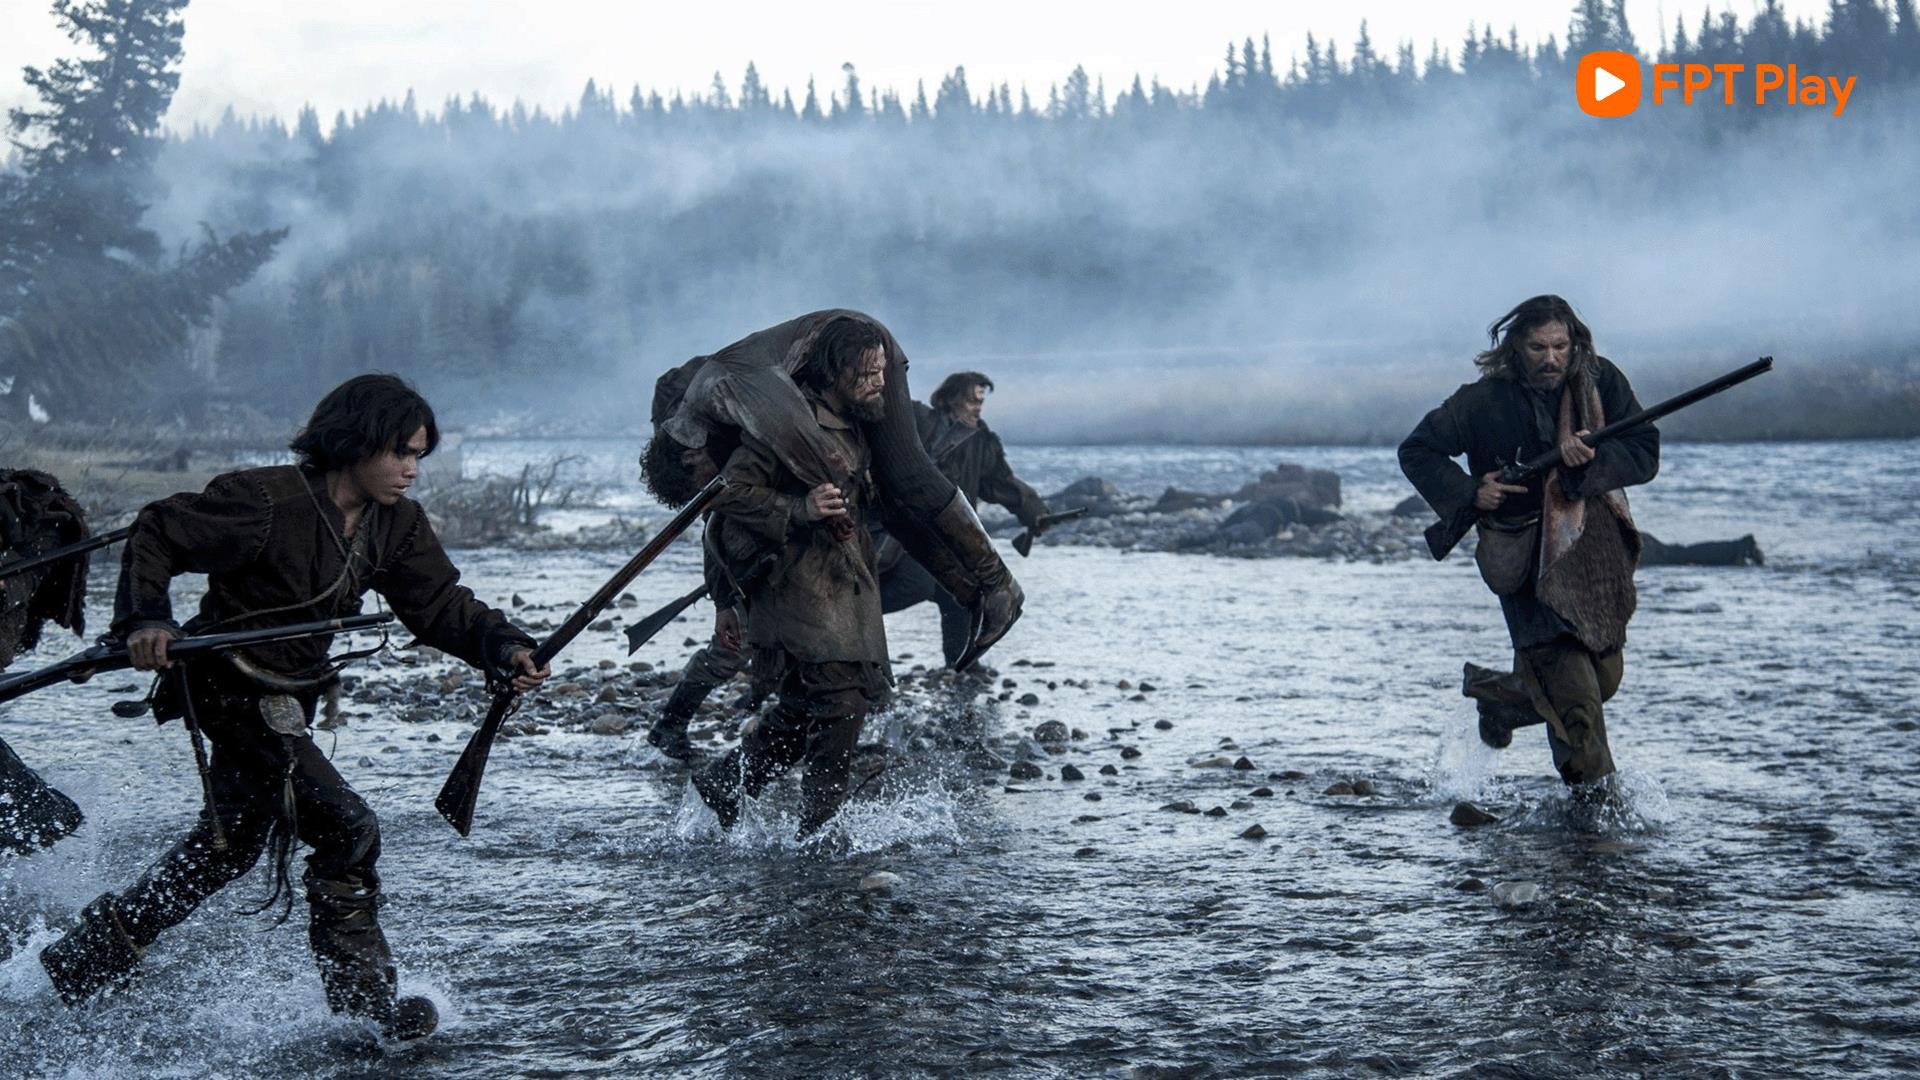 The Revenant: True survival works down to every centimeter in FPT Play - Photo 3.